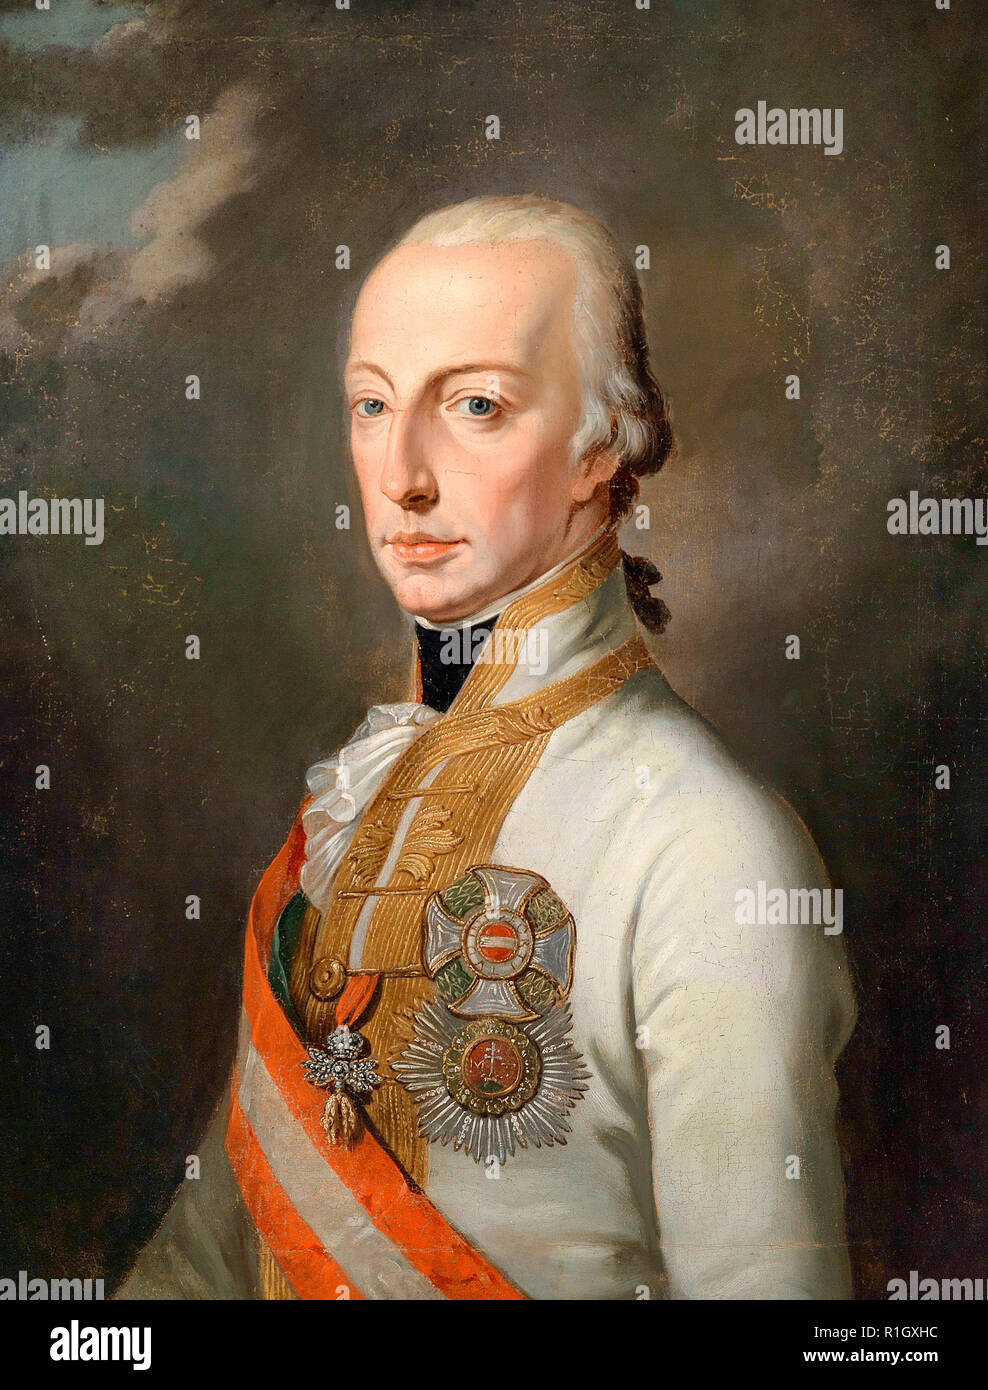 Emperor Franz I of Austria in Field Marshal Uniform, decorated with the Austrian House Order, circa 1820 Stock Photo